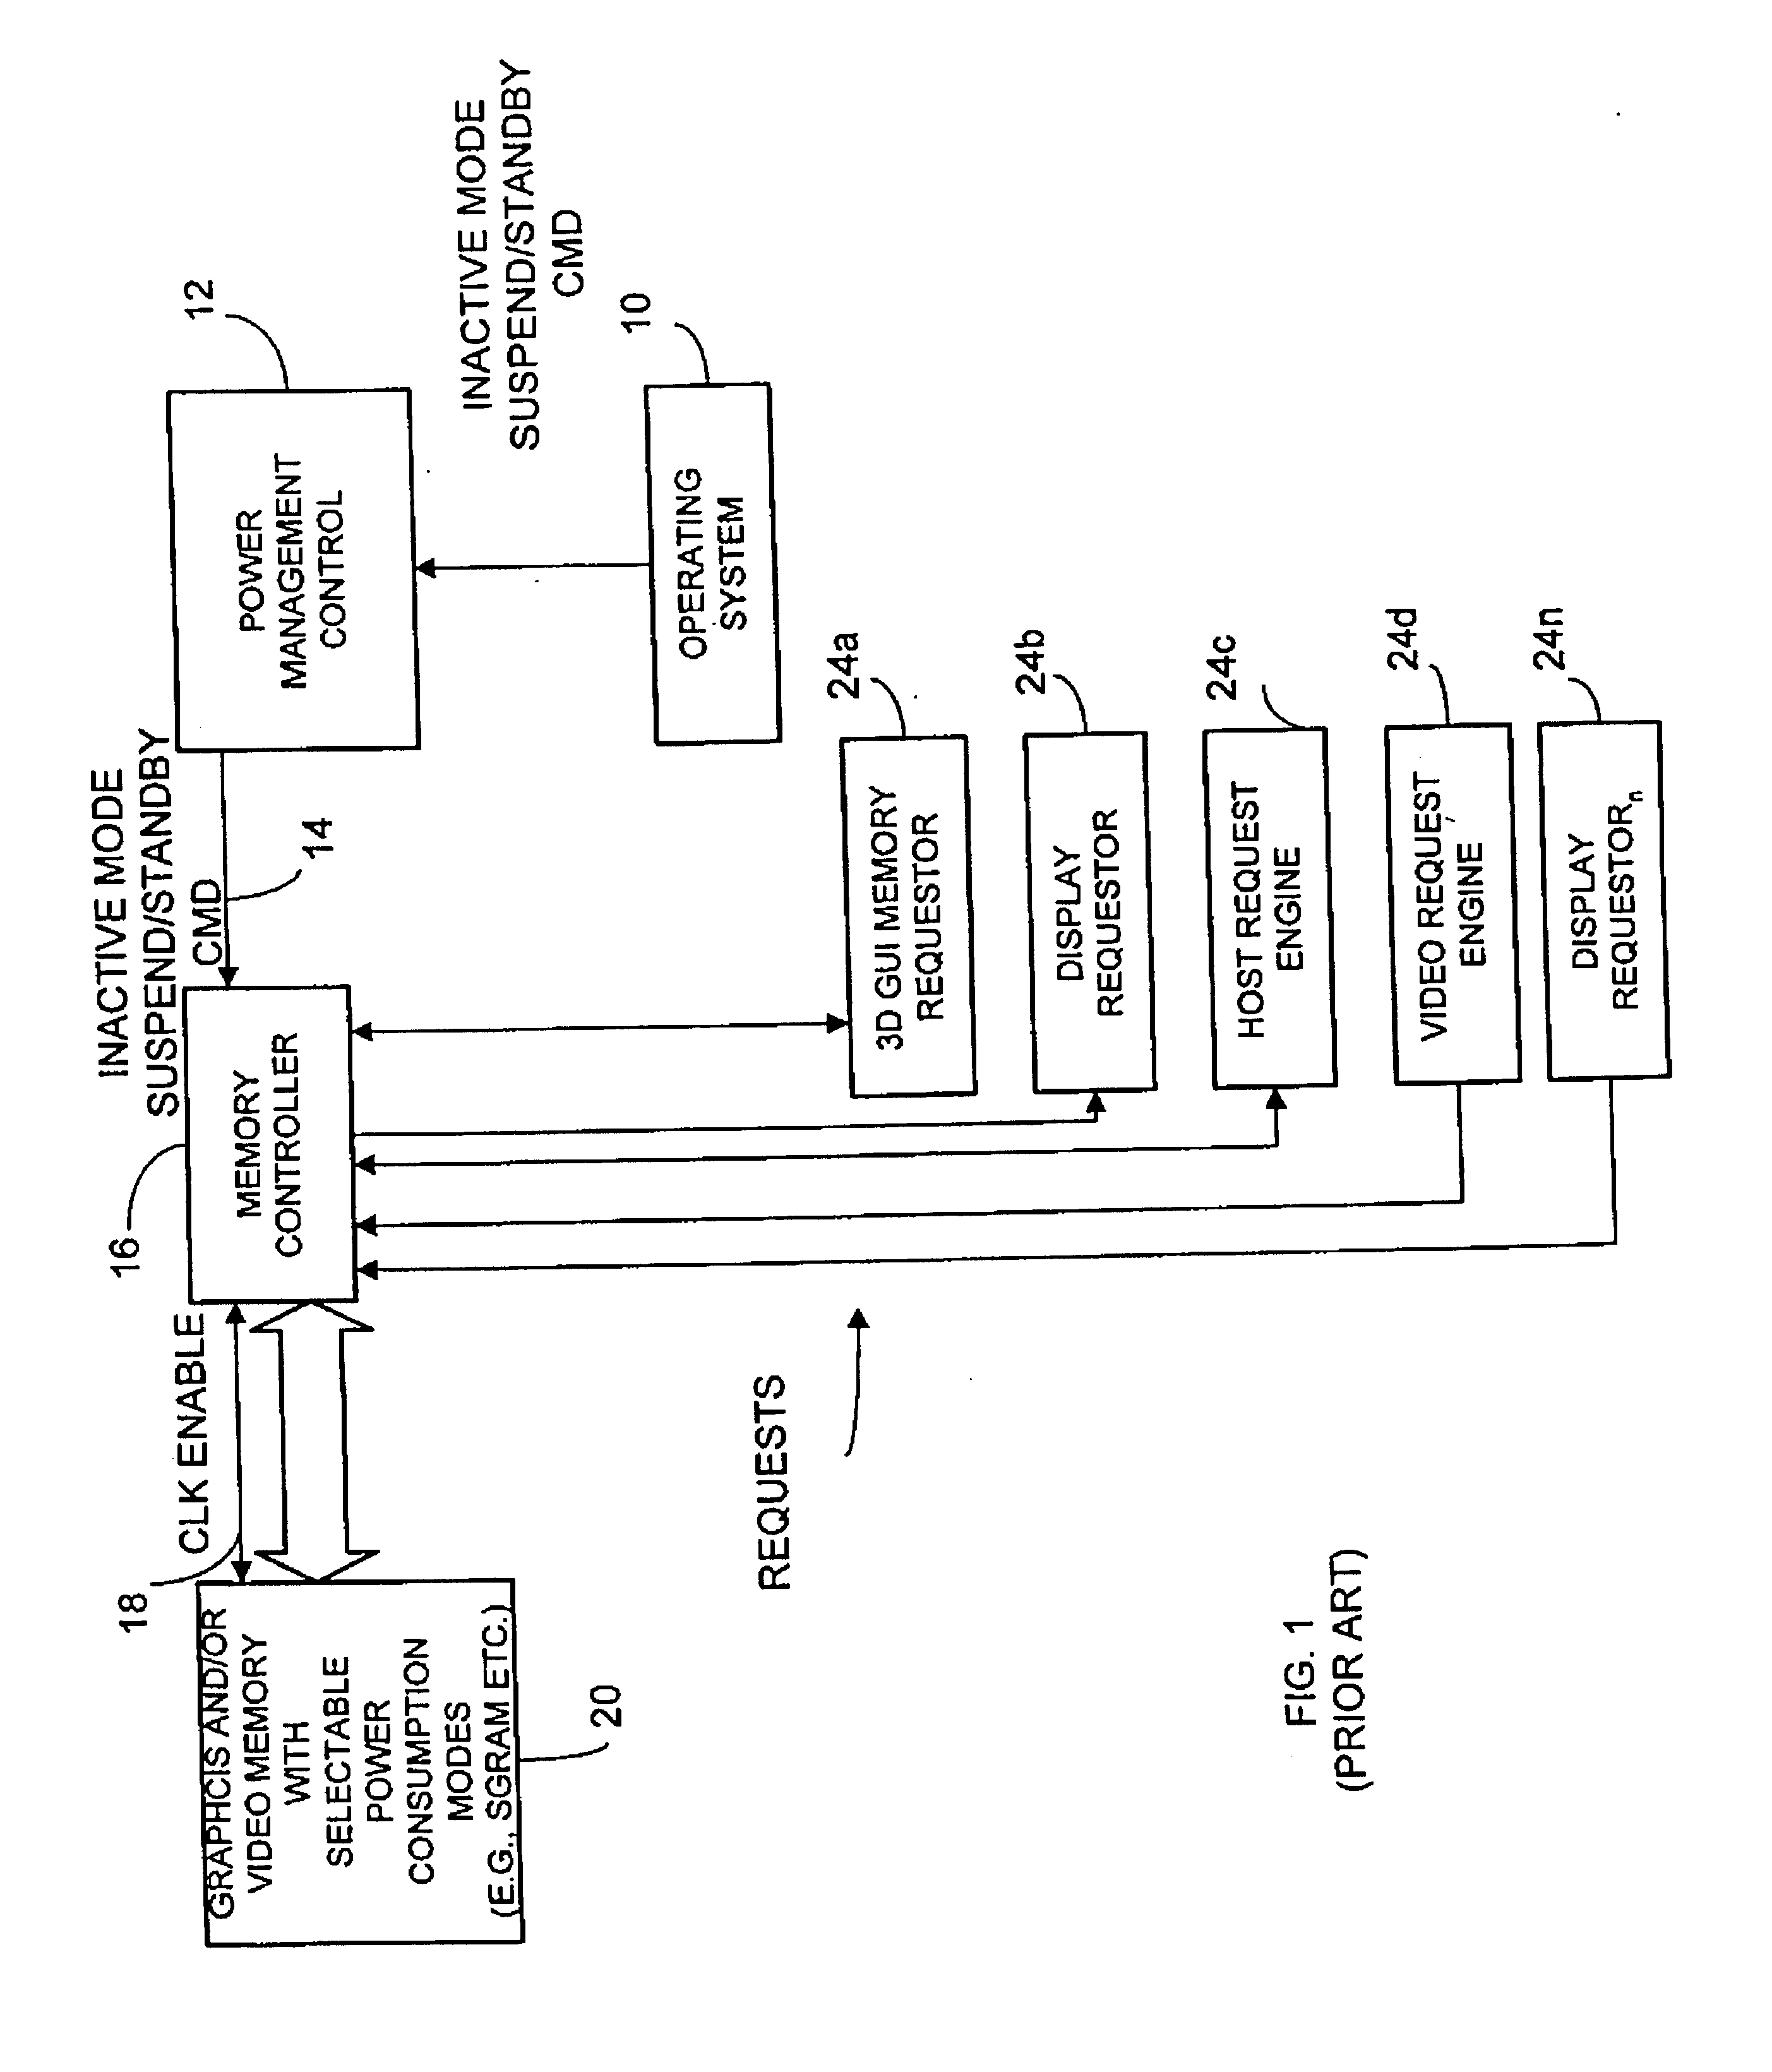 Power reduction circuit and method with multi clock branch control